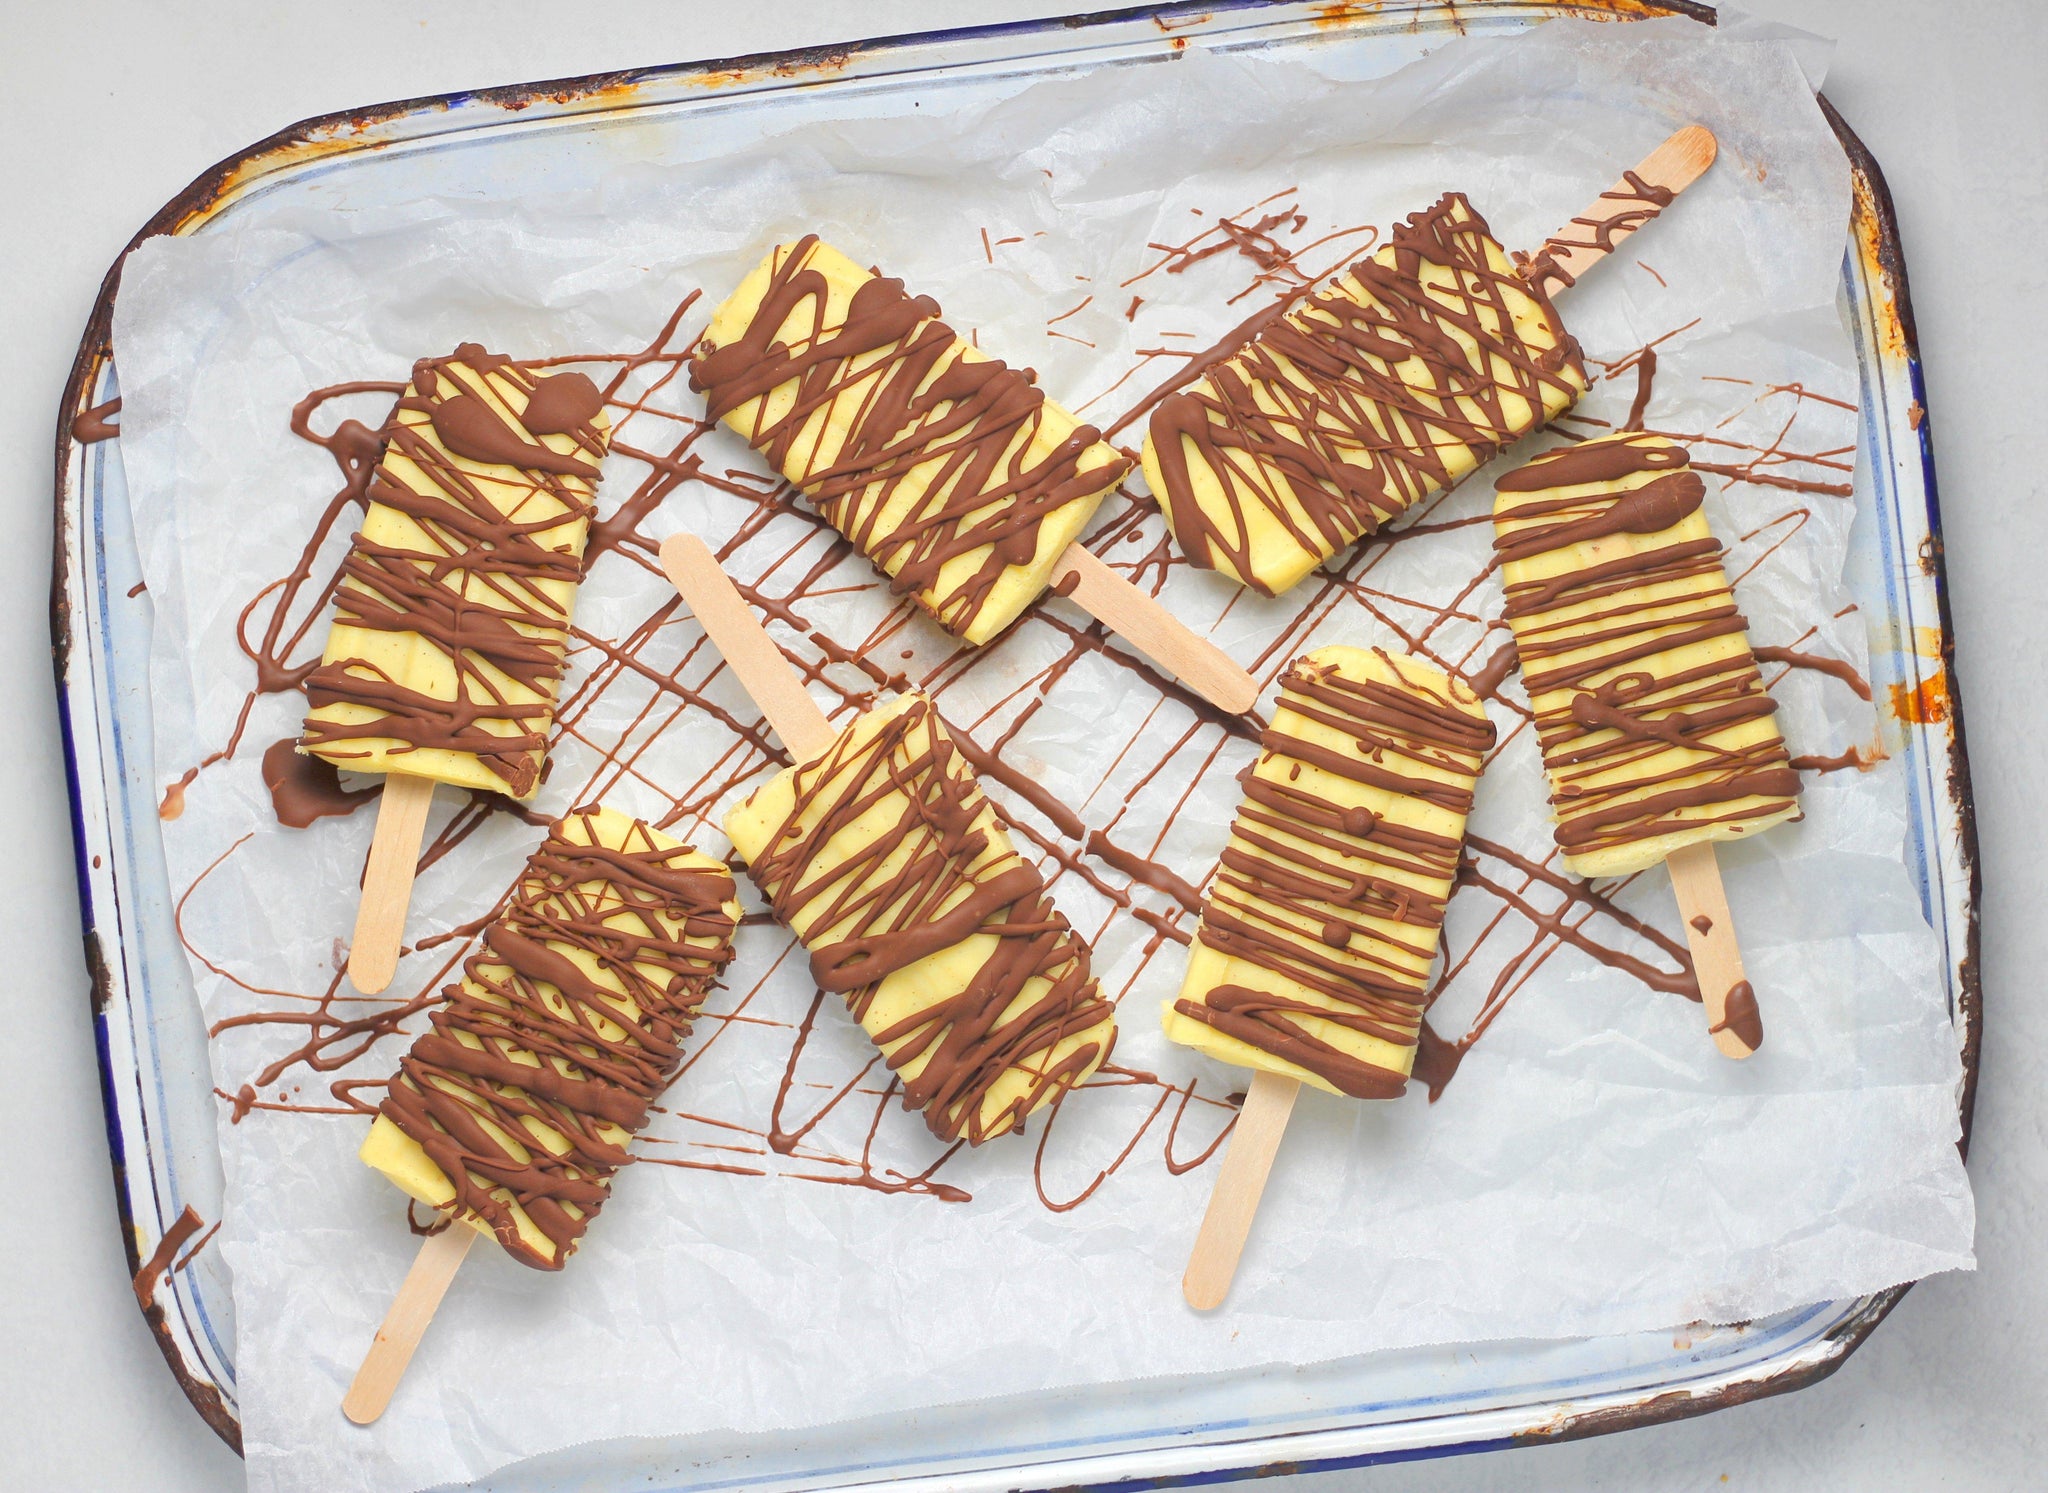 Creamy Eggnog Popsicles with Chocolate Drizzle